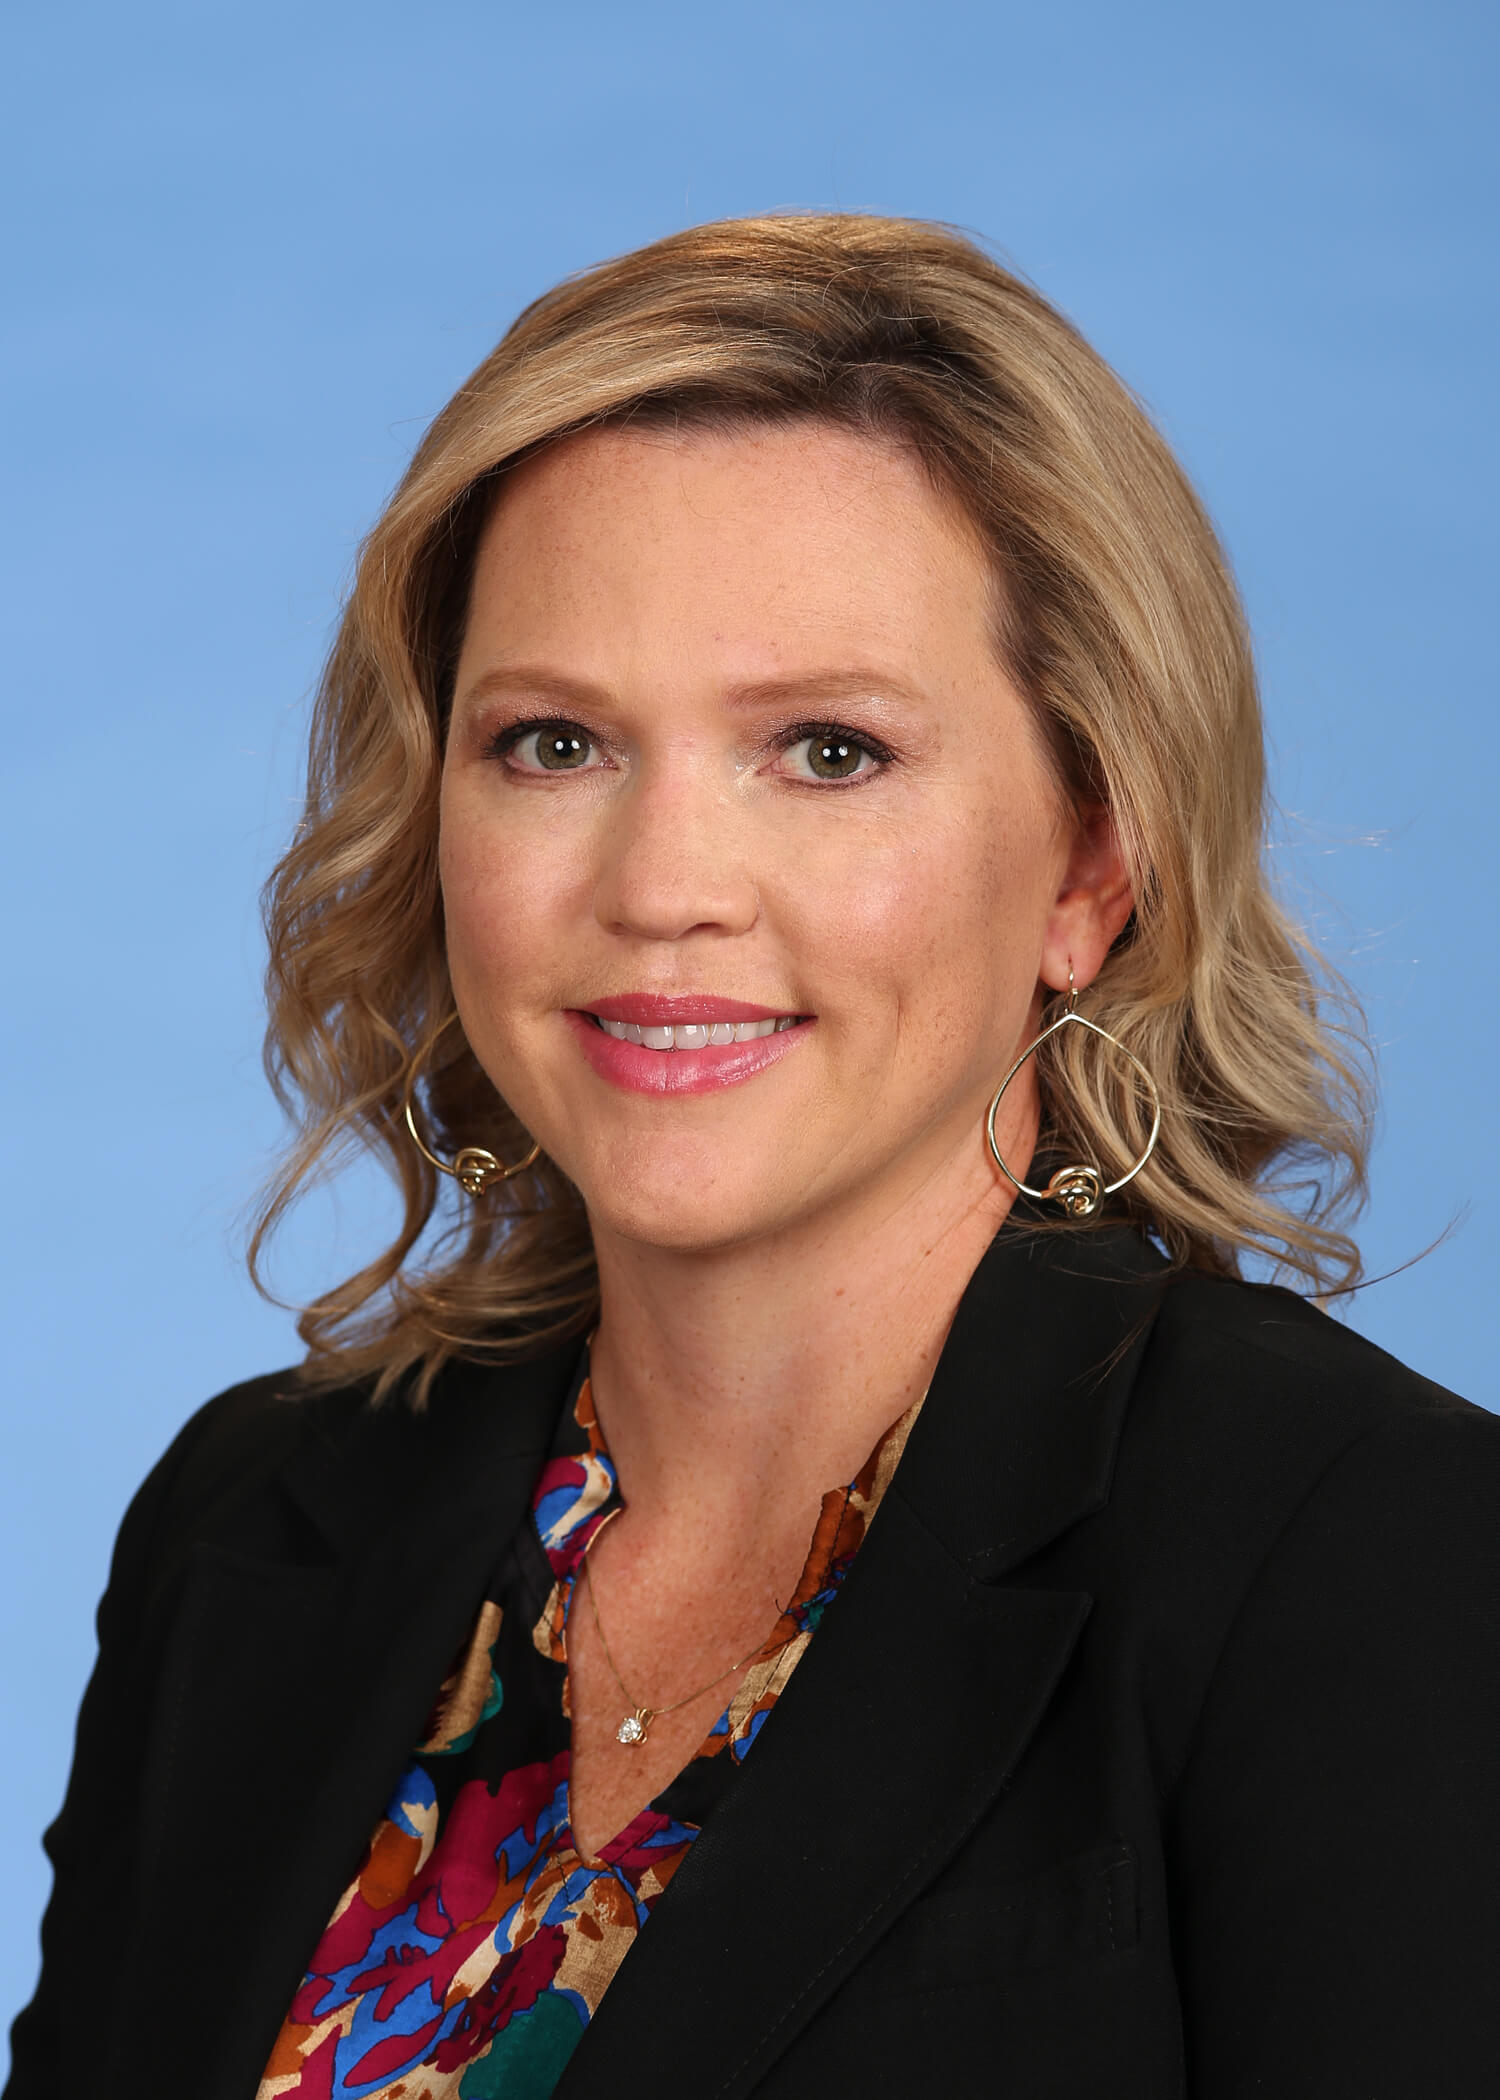 Mindy Hamm as Vice President, General Counsel